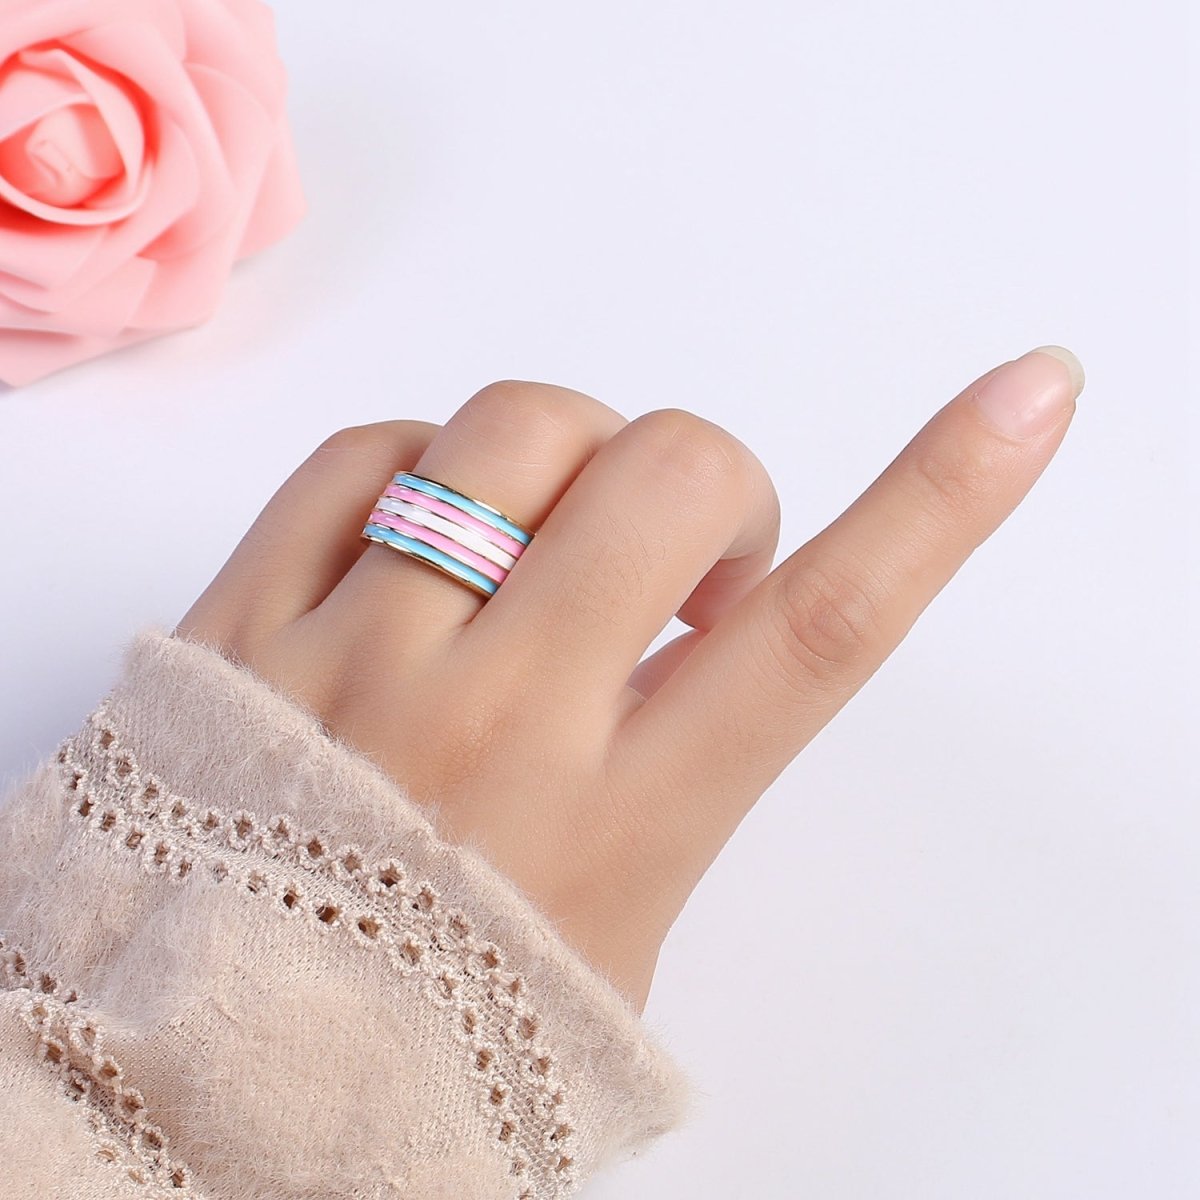 Pride Flag Rings LGBTQ Ring Gold Filled Open Adjustable Stackable Ring Trans Gay Pansexual Nonbinary Non Binary Bisexual Genderfluid Asexual Genderqueer U-061~U-068 - DLUXCA